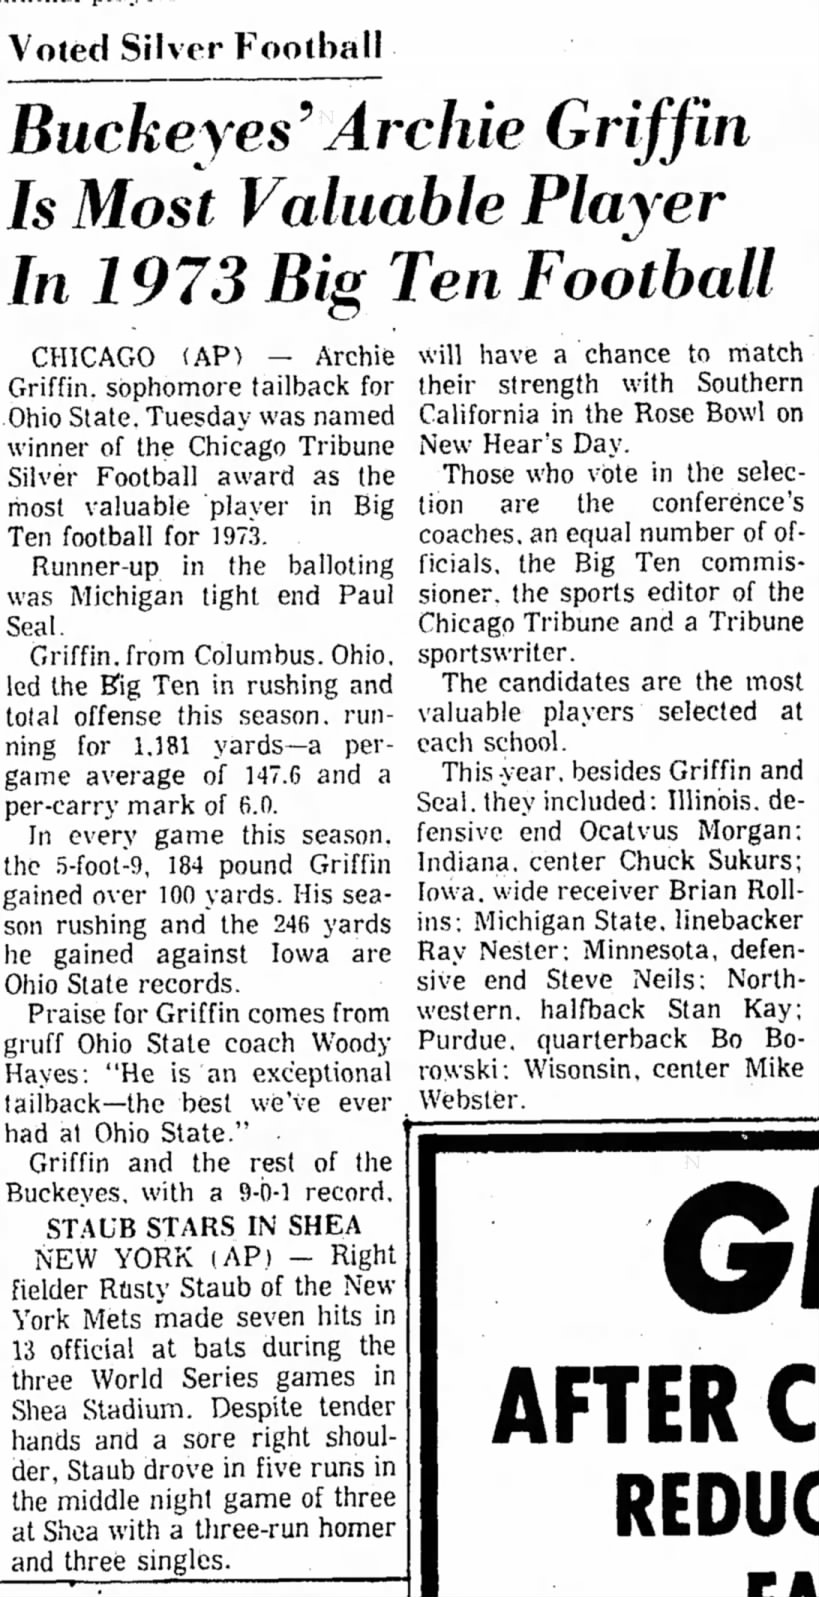 Voted Silver Football: Buckeyes' Archie Griffin Is Most Valuable Player In 1973 Big Ten Football